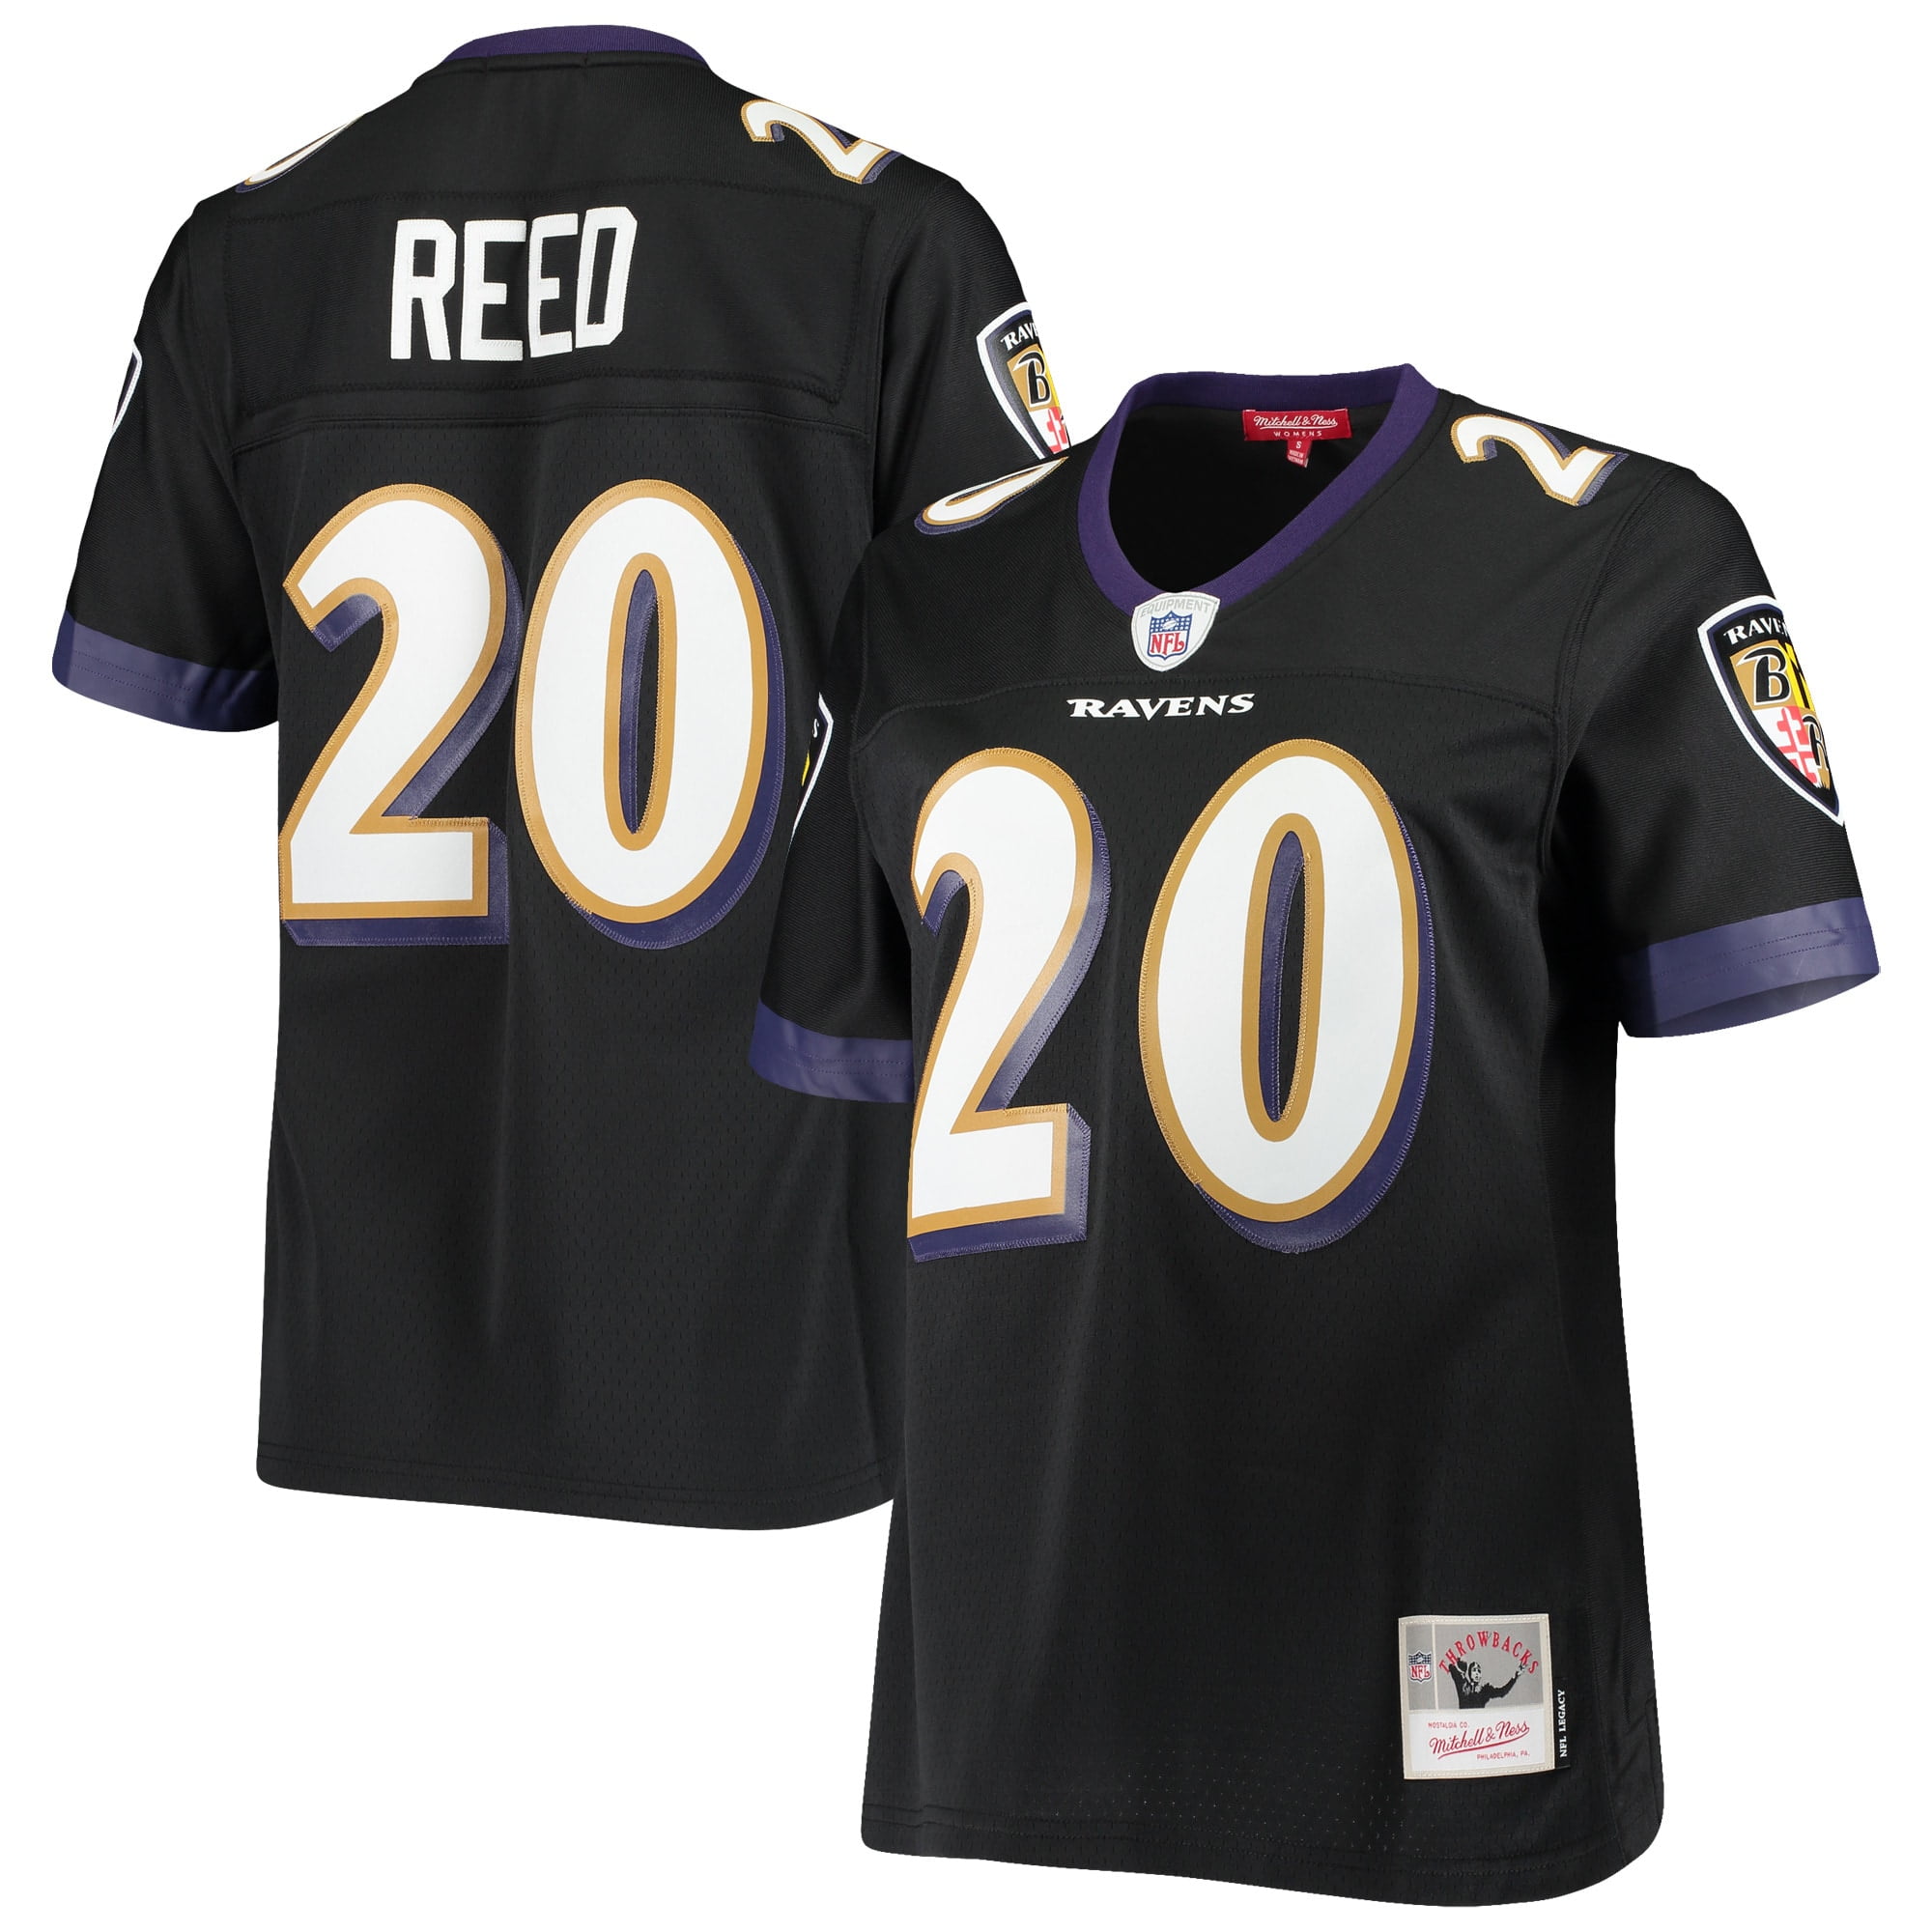 ed reed jersey mitchell and ness